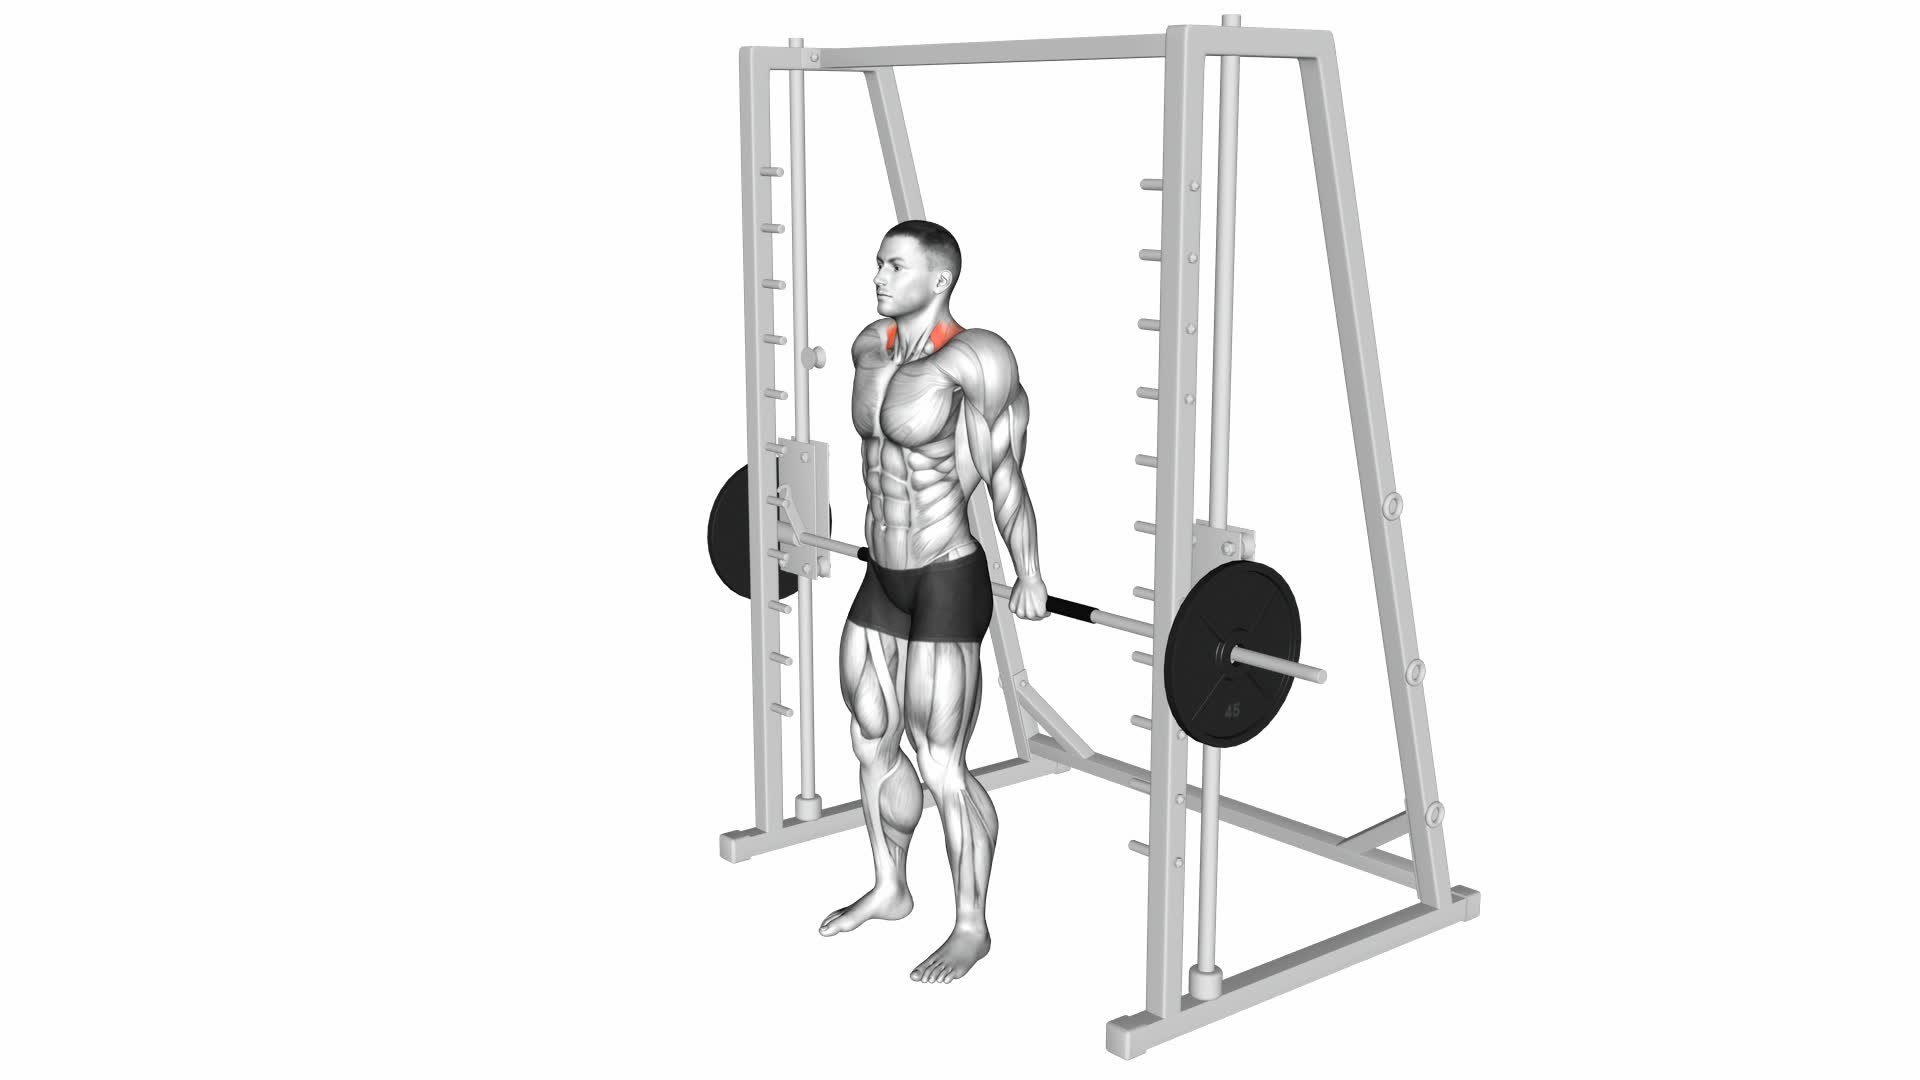 Smith Back Shrug - Video Exercise Guide & Tips